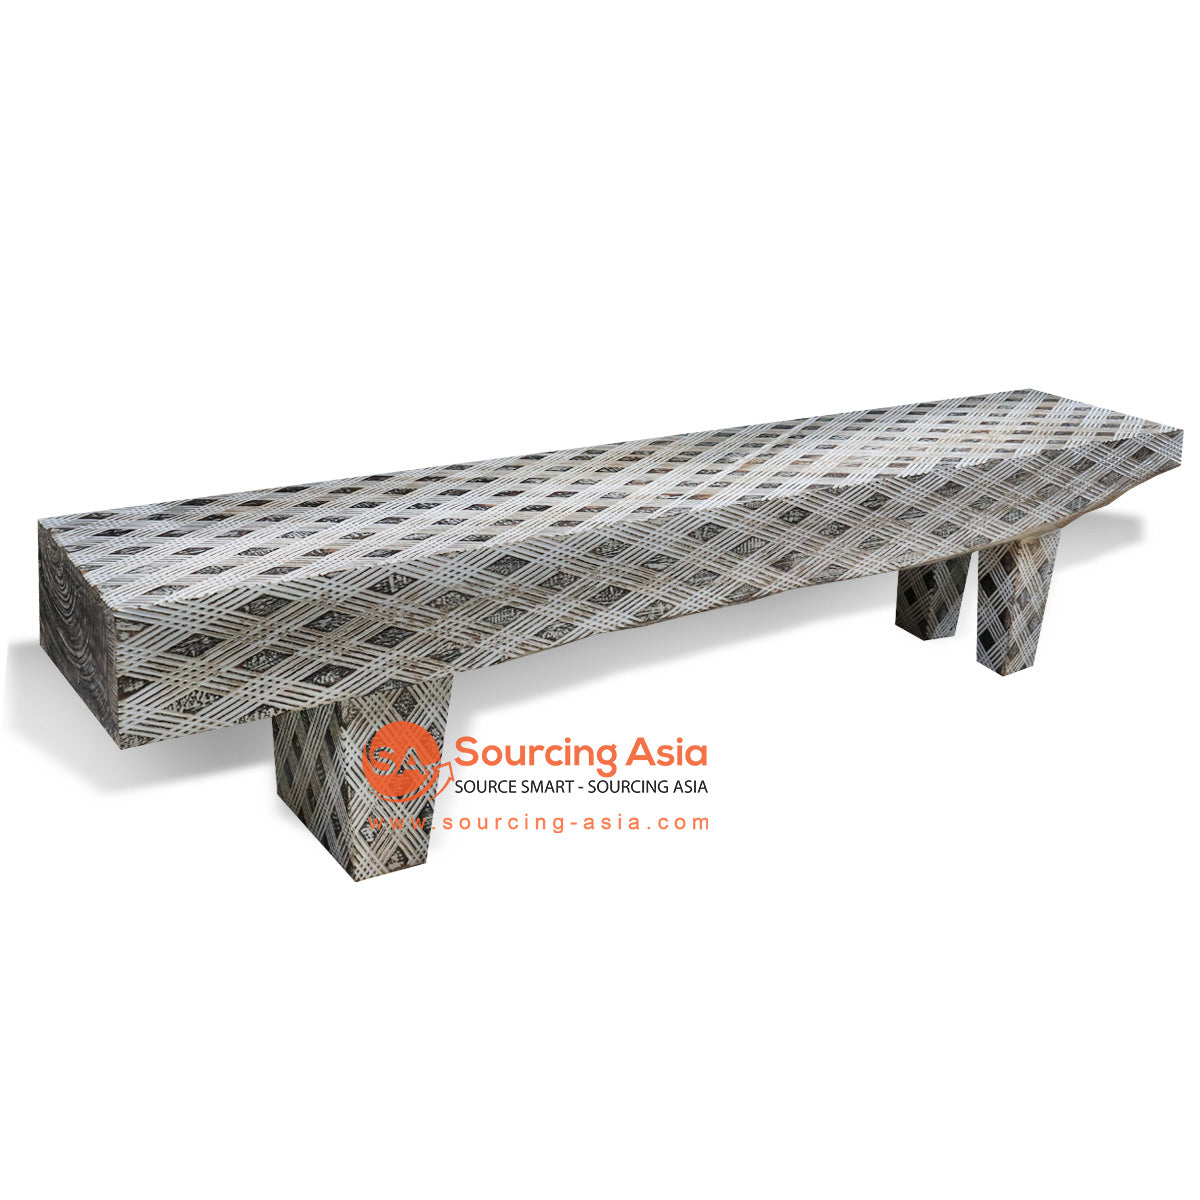 BMW271 SILVER SUAR WOOD ETHNIC PAPUA STYLE CARVED BENCH